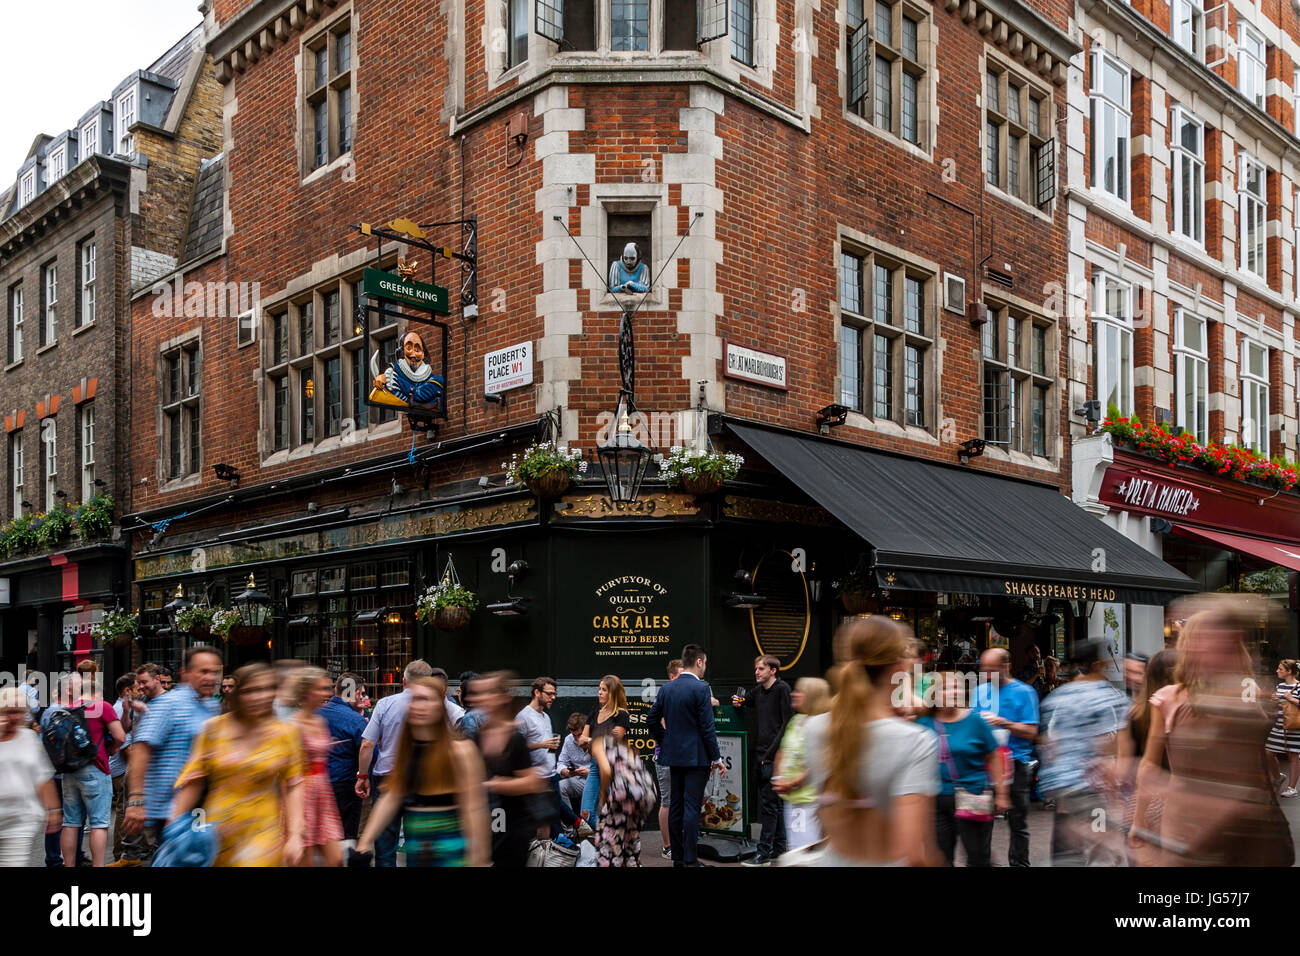 People Shopping In Carnaby Street, Londra, Regno Unito Foto Stock